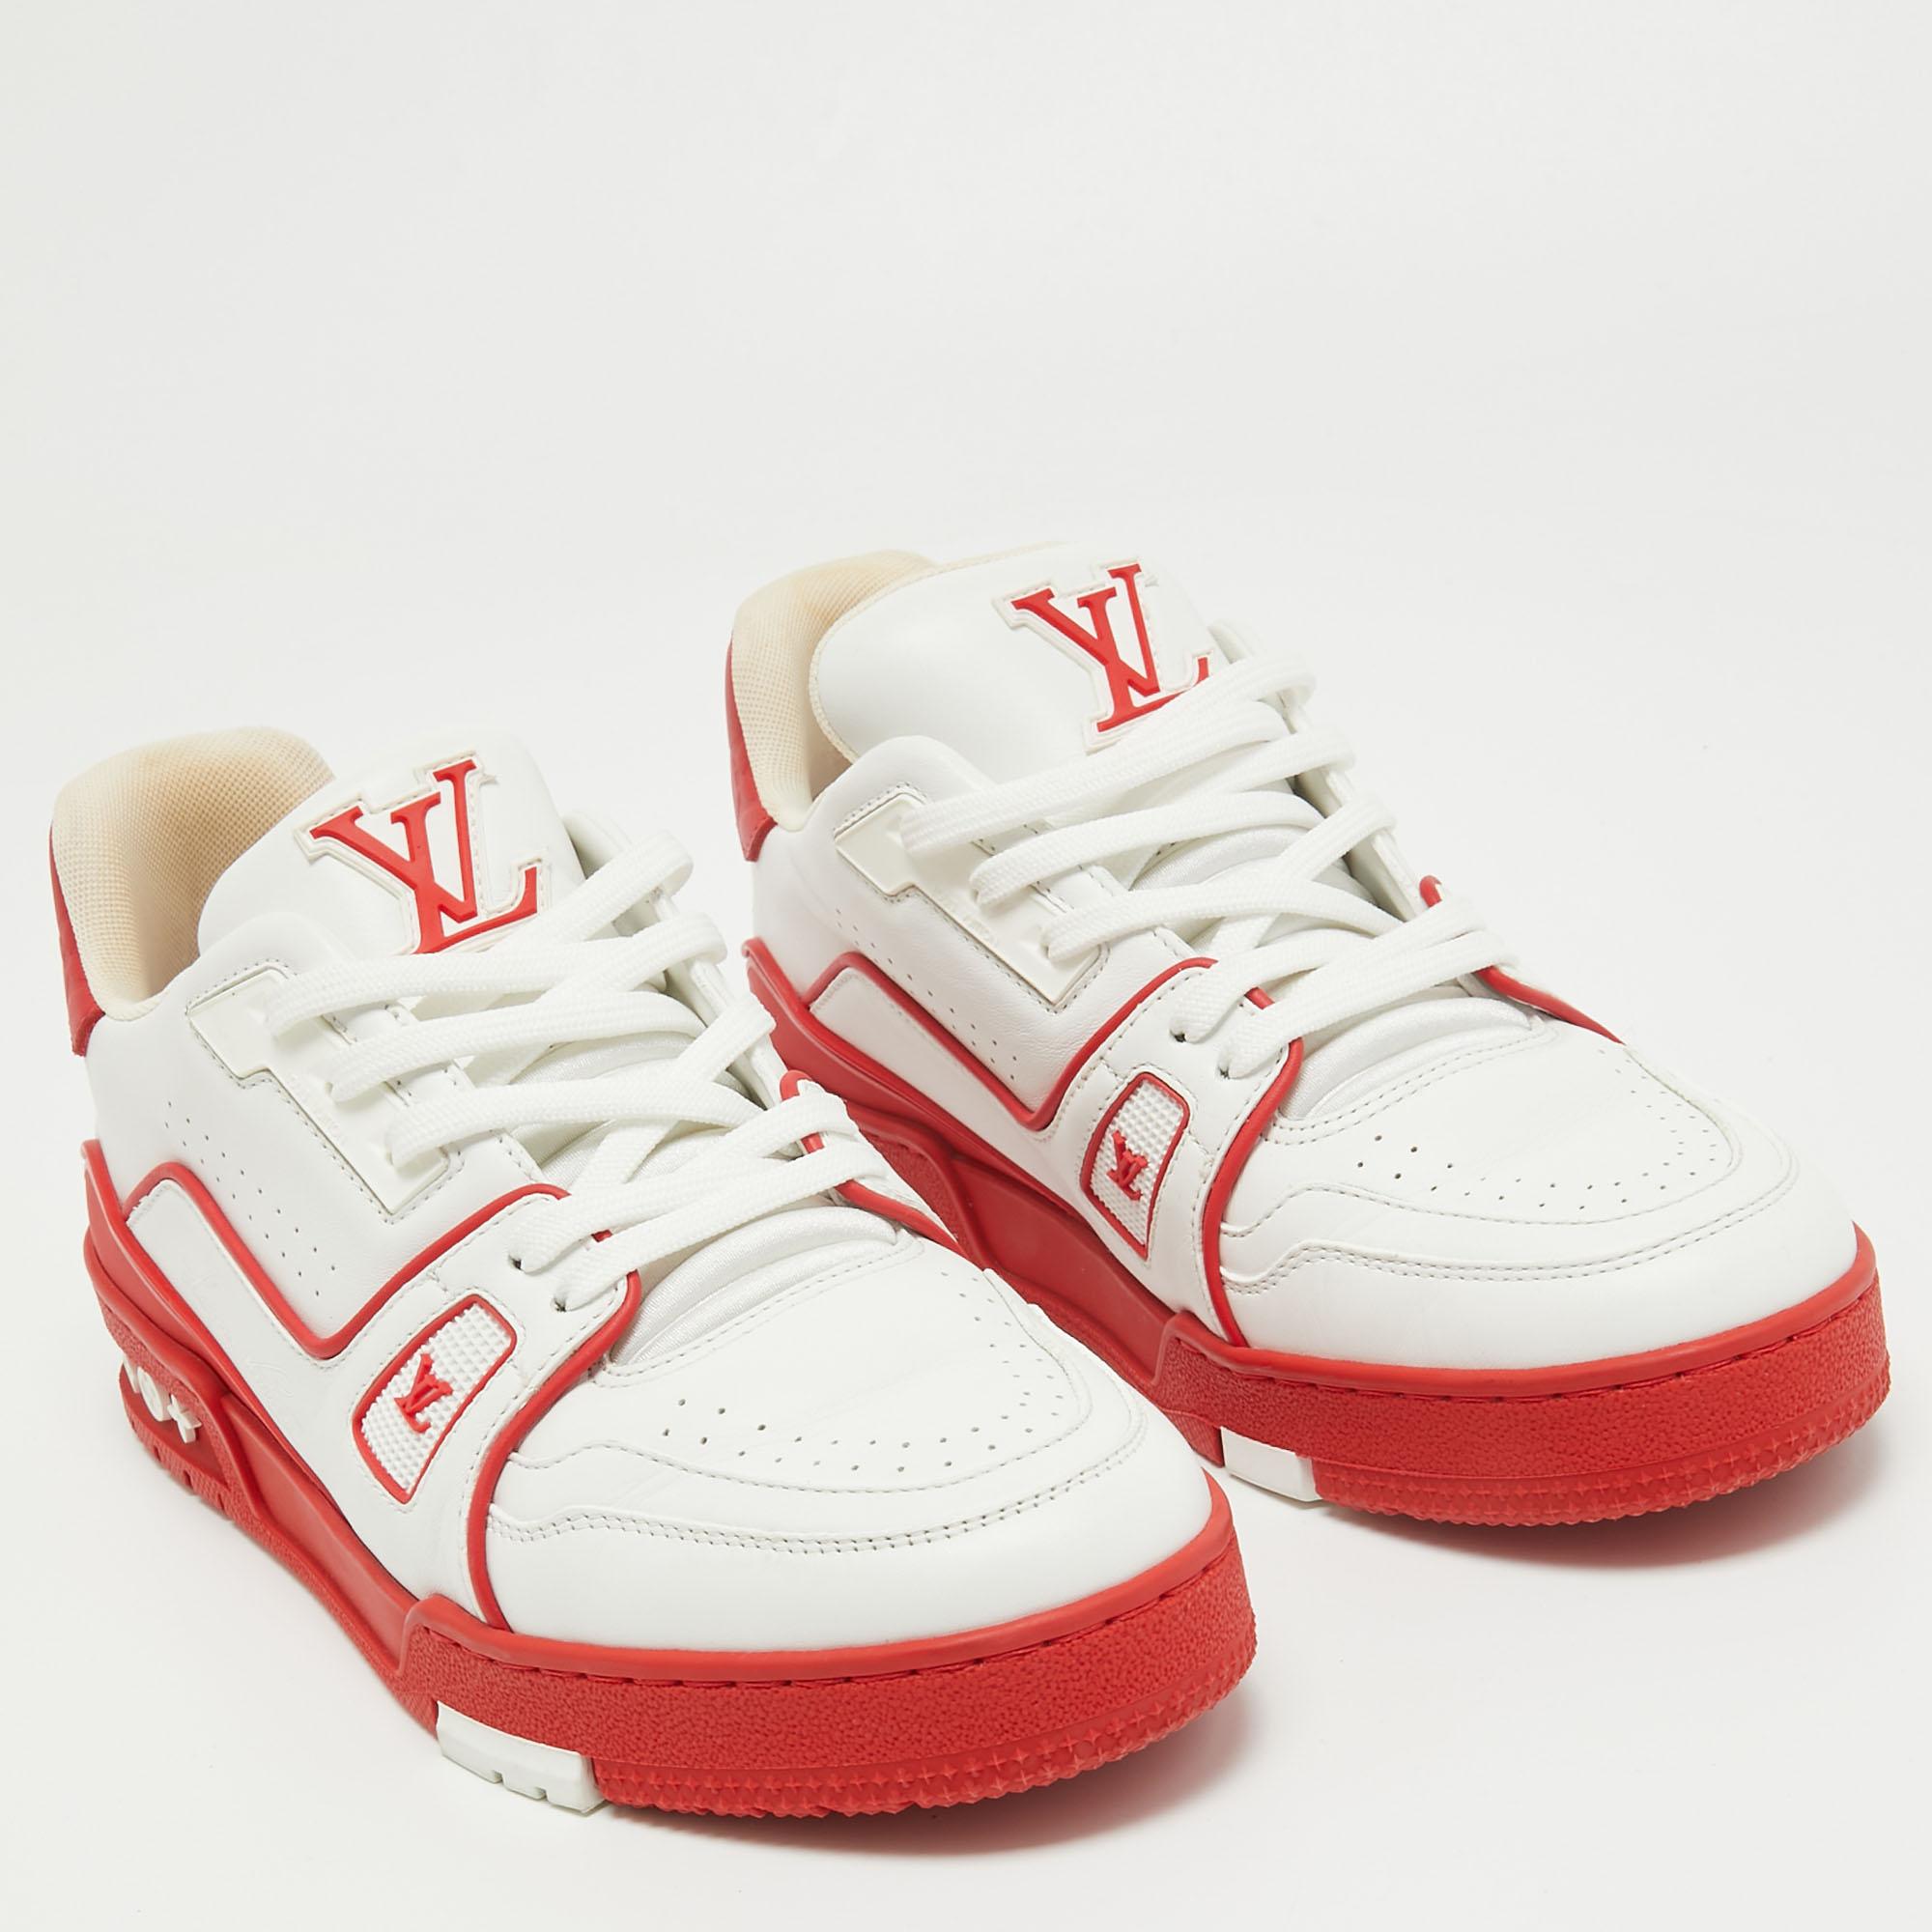 Louis Vuitton White/Red Leather LV Trainer Sneakers Size 39.5 For Sale 1